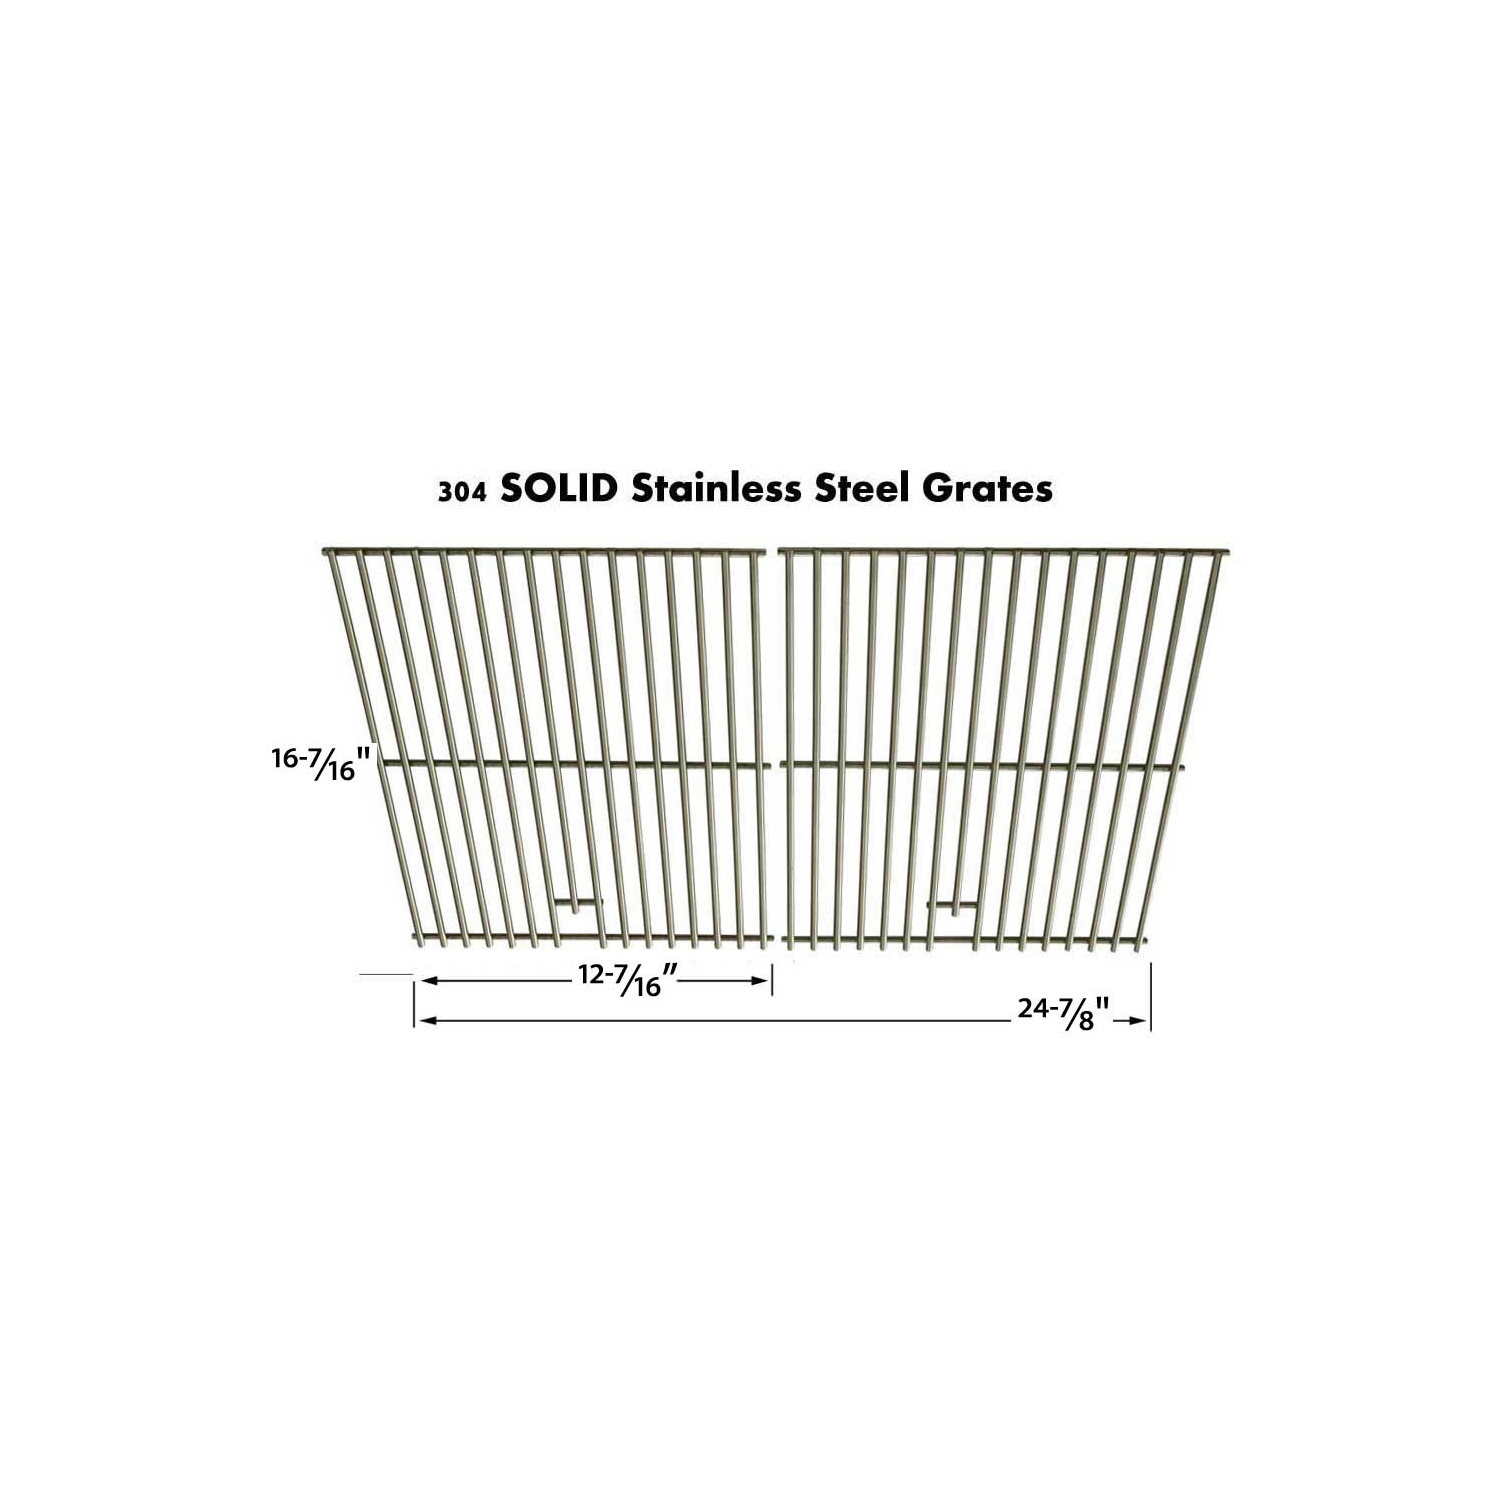 Replacement Cooking Grid For Centro 85-1095-6, 85-1198-2, 85-1198-2, 85-1210-2, G40204, G40205,G40304, Models, Set of 2